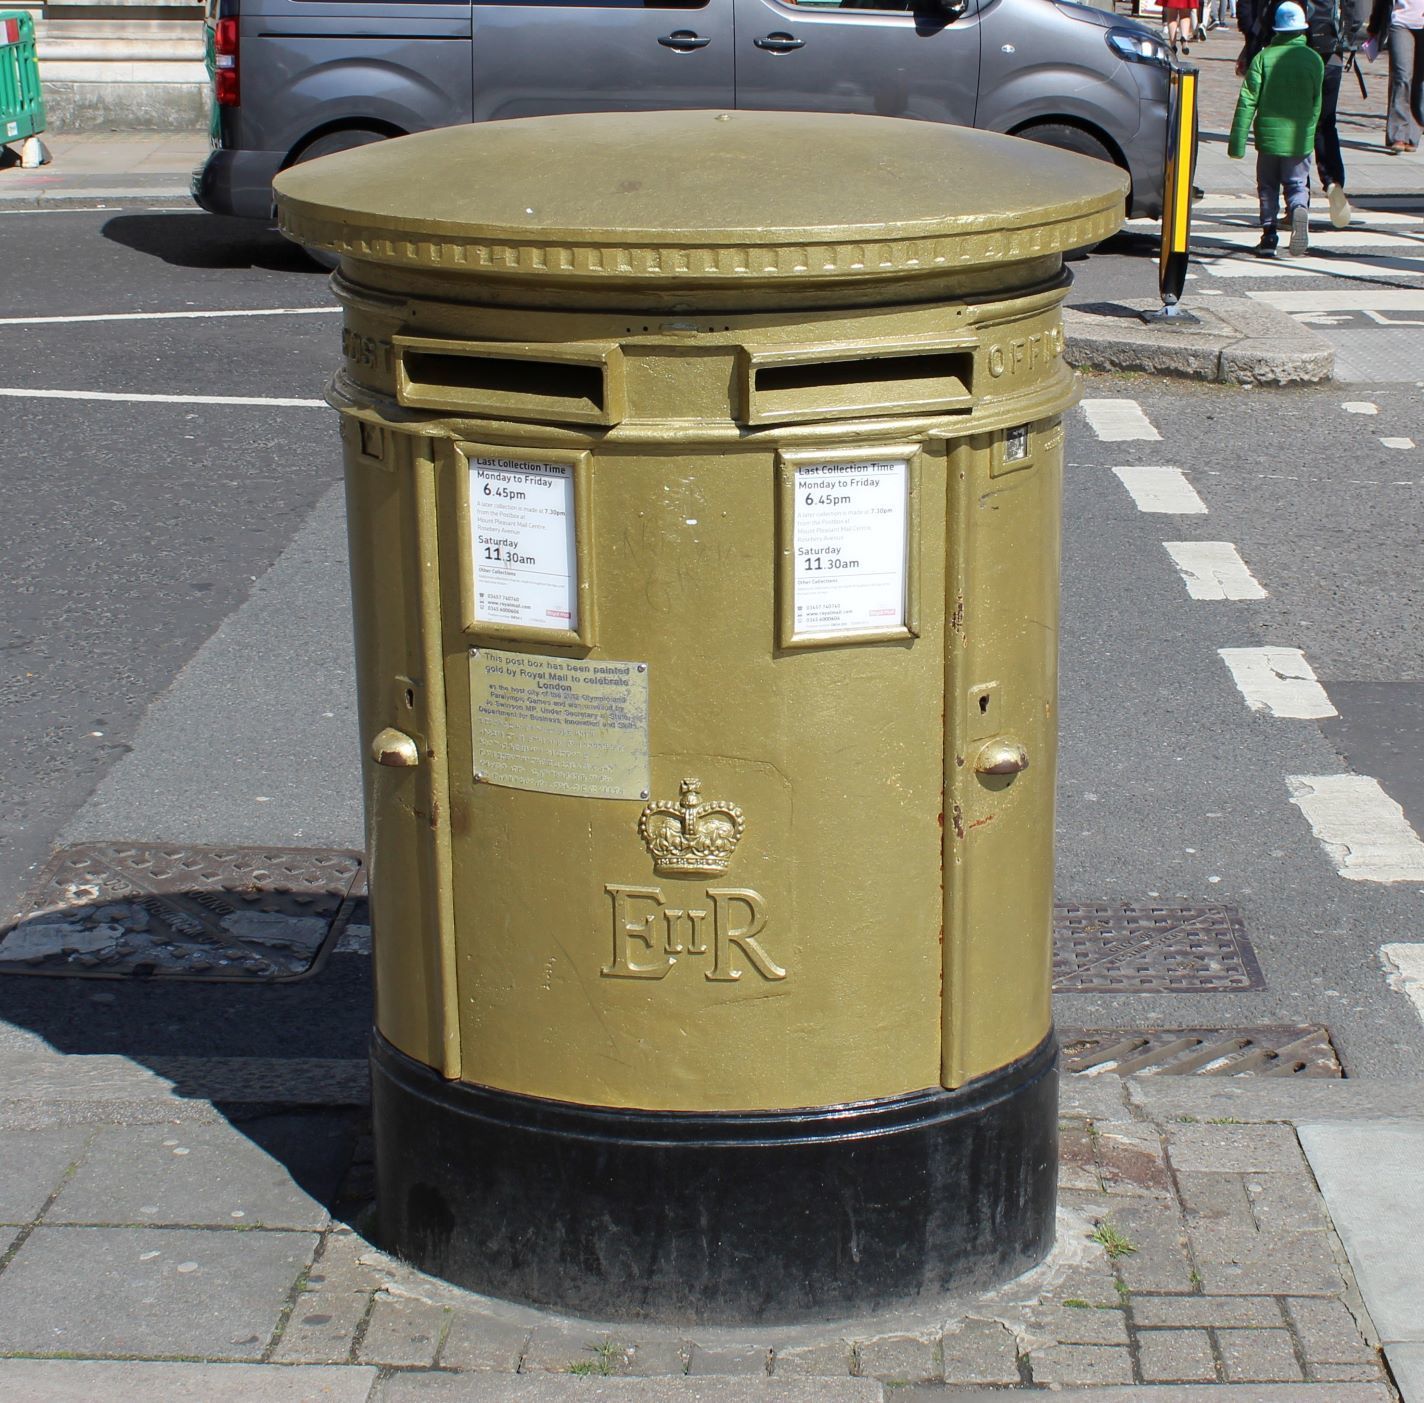 2012 Olympic Postbox